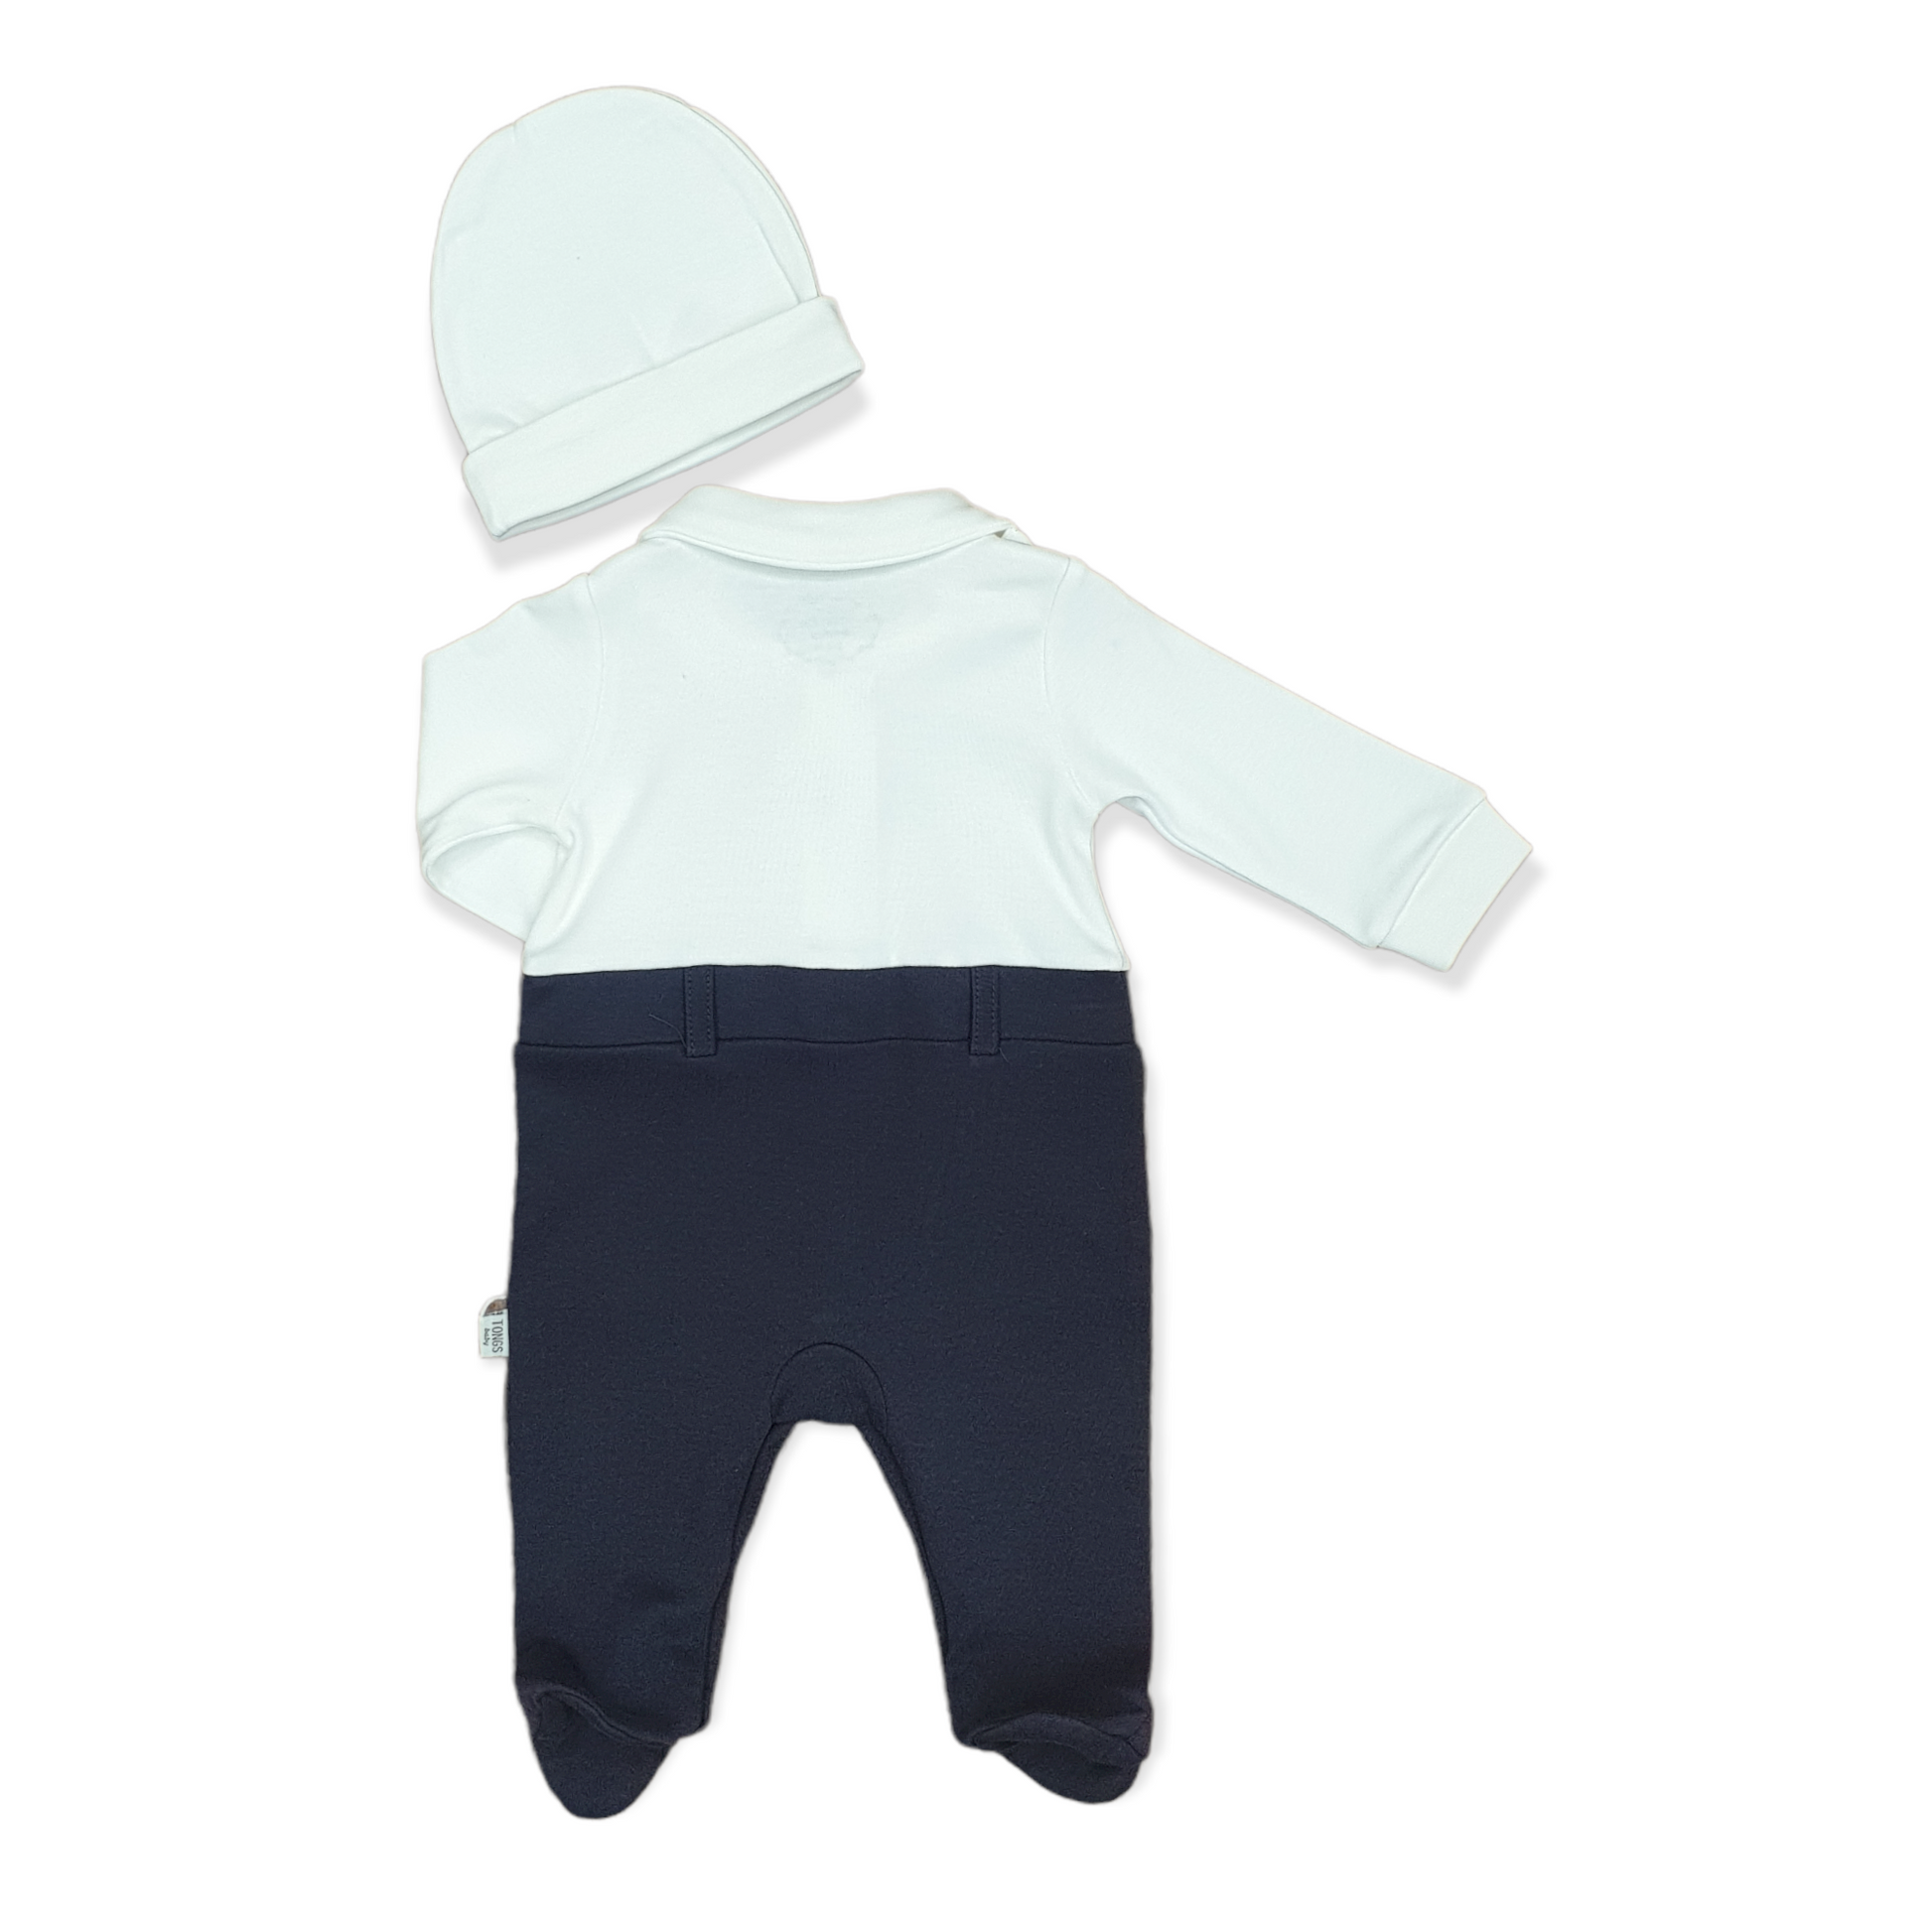 Boy Scout My Camp Jumpsuit with Cap-Blue, Boy, Camp, Cap, catboy, catset2pcs, Dark Blue, Footed, Jumpsuit, Long Sleeve, Scout, Tie, White-Tongs-[Too Twee]-[Tootwee]-[baby]-[newborn]-[clothes]-[essentials]-[toys]-[Lebanon]